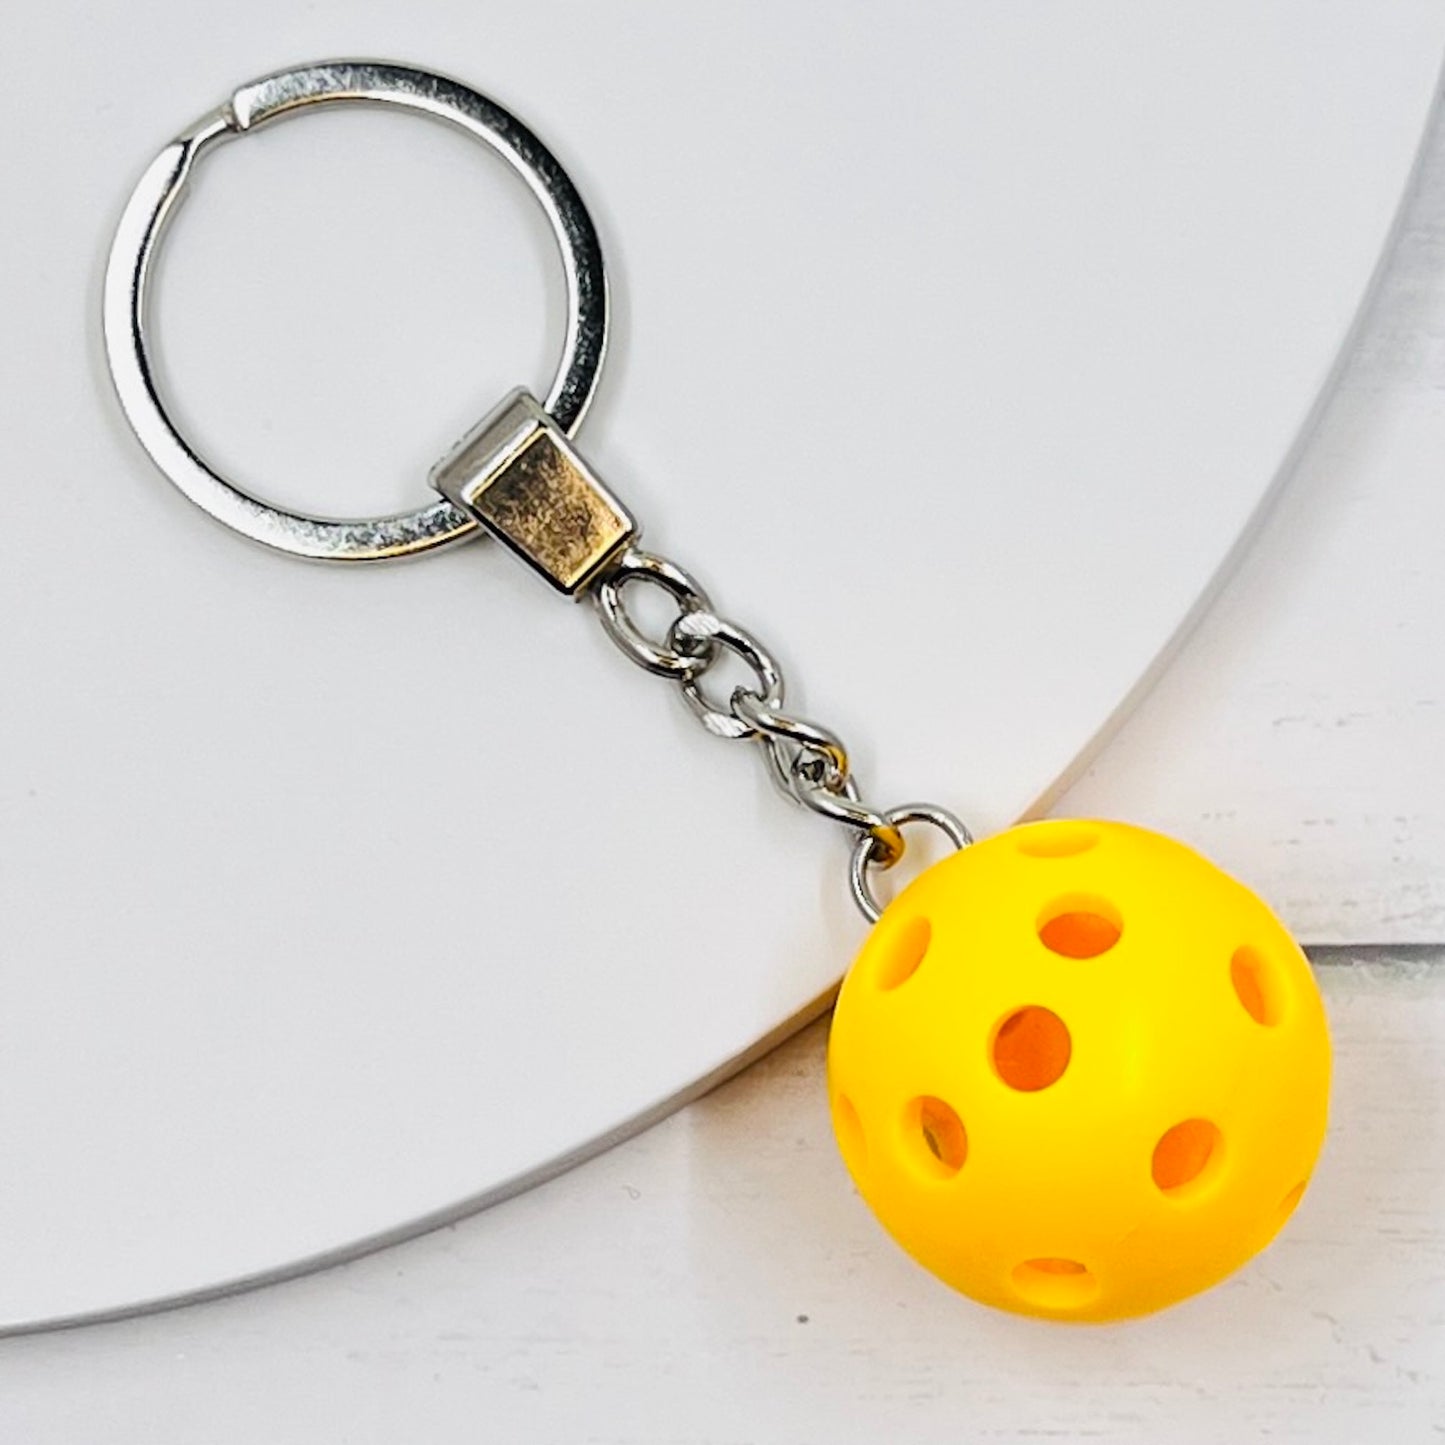 Heavy Duty Micro Pickleball Bags Tags/Pulls  Each order gets you 1 of the cutest little pickleball and heavy duty chains! The micro pickleballs measure about 1 inch and are used as bag tag markers. Fun for any bag, especially your pickleball bag!! The balls come in 4 colors: Red, Green, Blue, and Yellow. Choose from 4 fun colors.